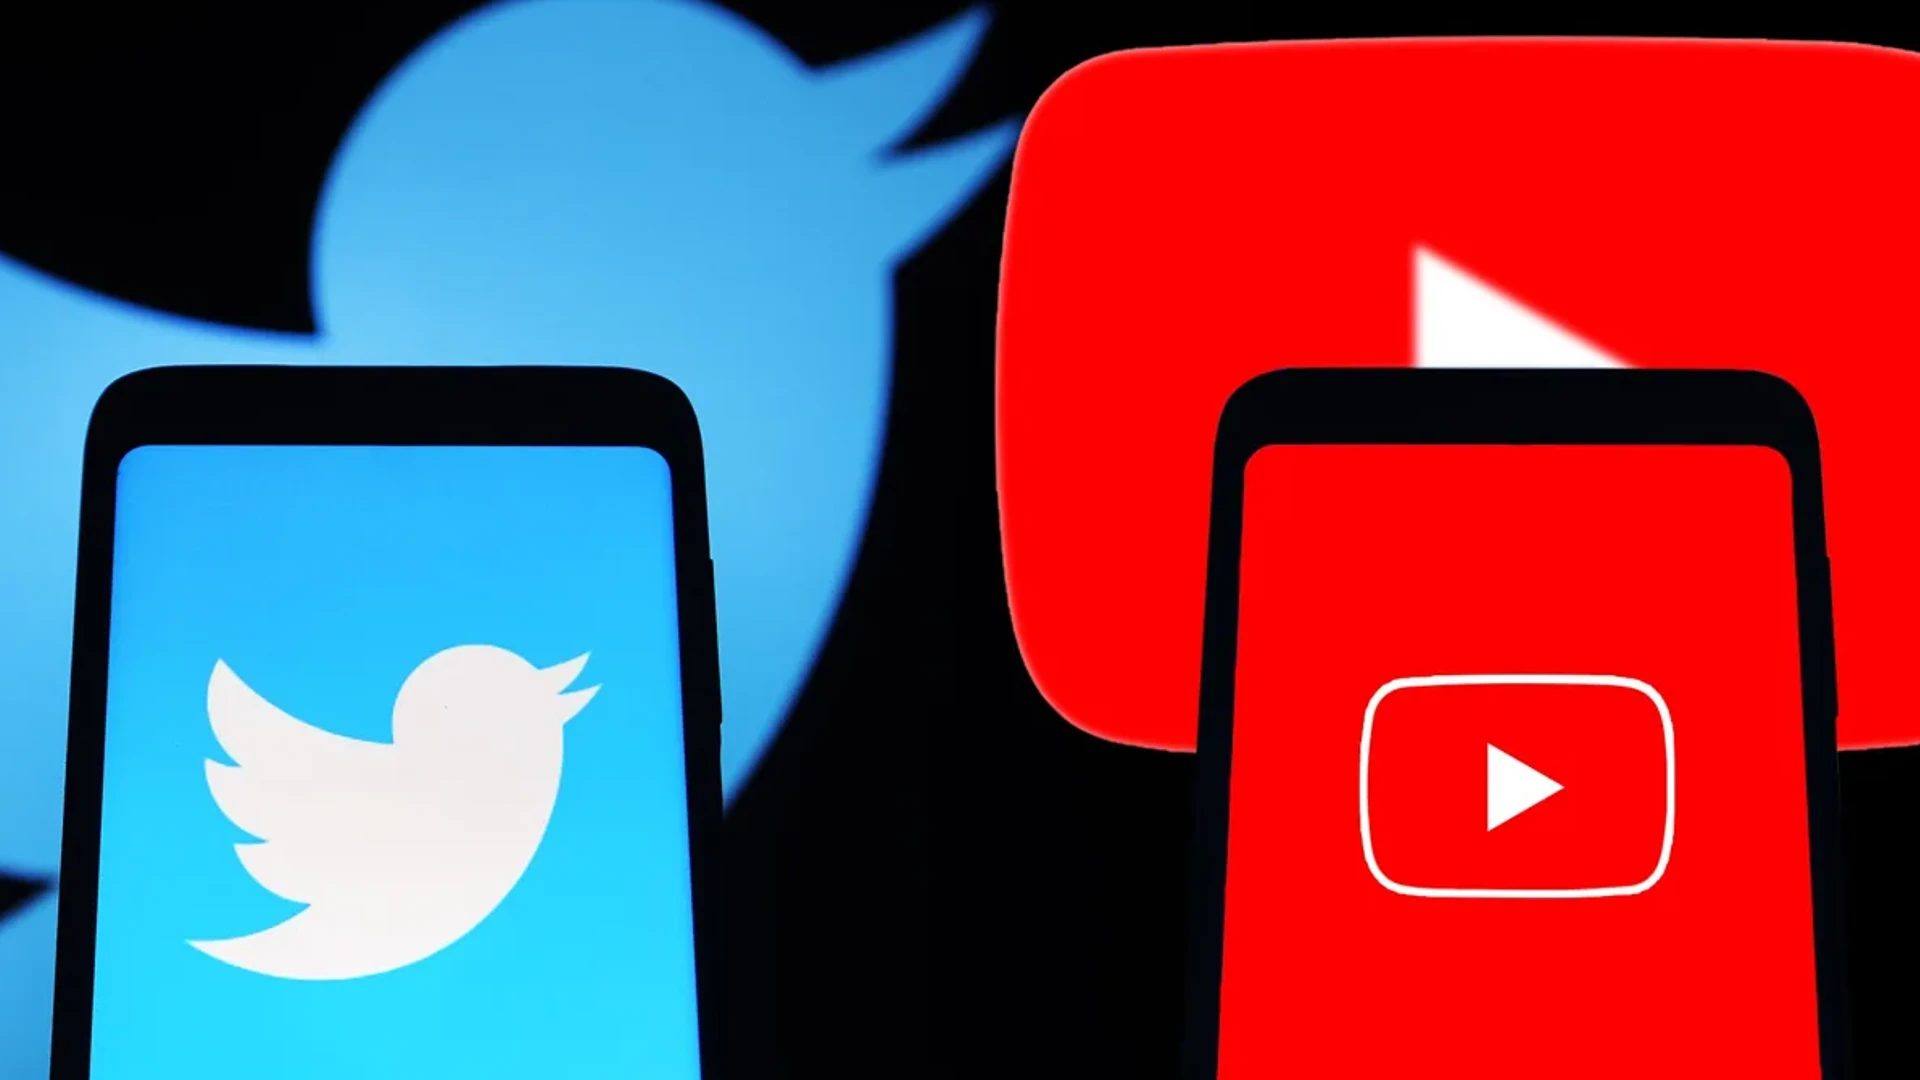 IT Ministry Blocks 73 Twitter Accounts, 4 Youtube Channels For Sharing Fake News